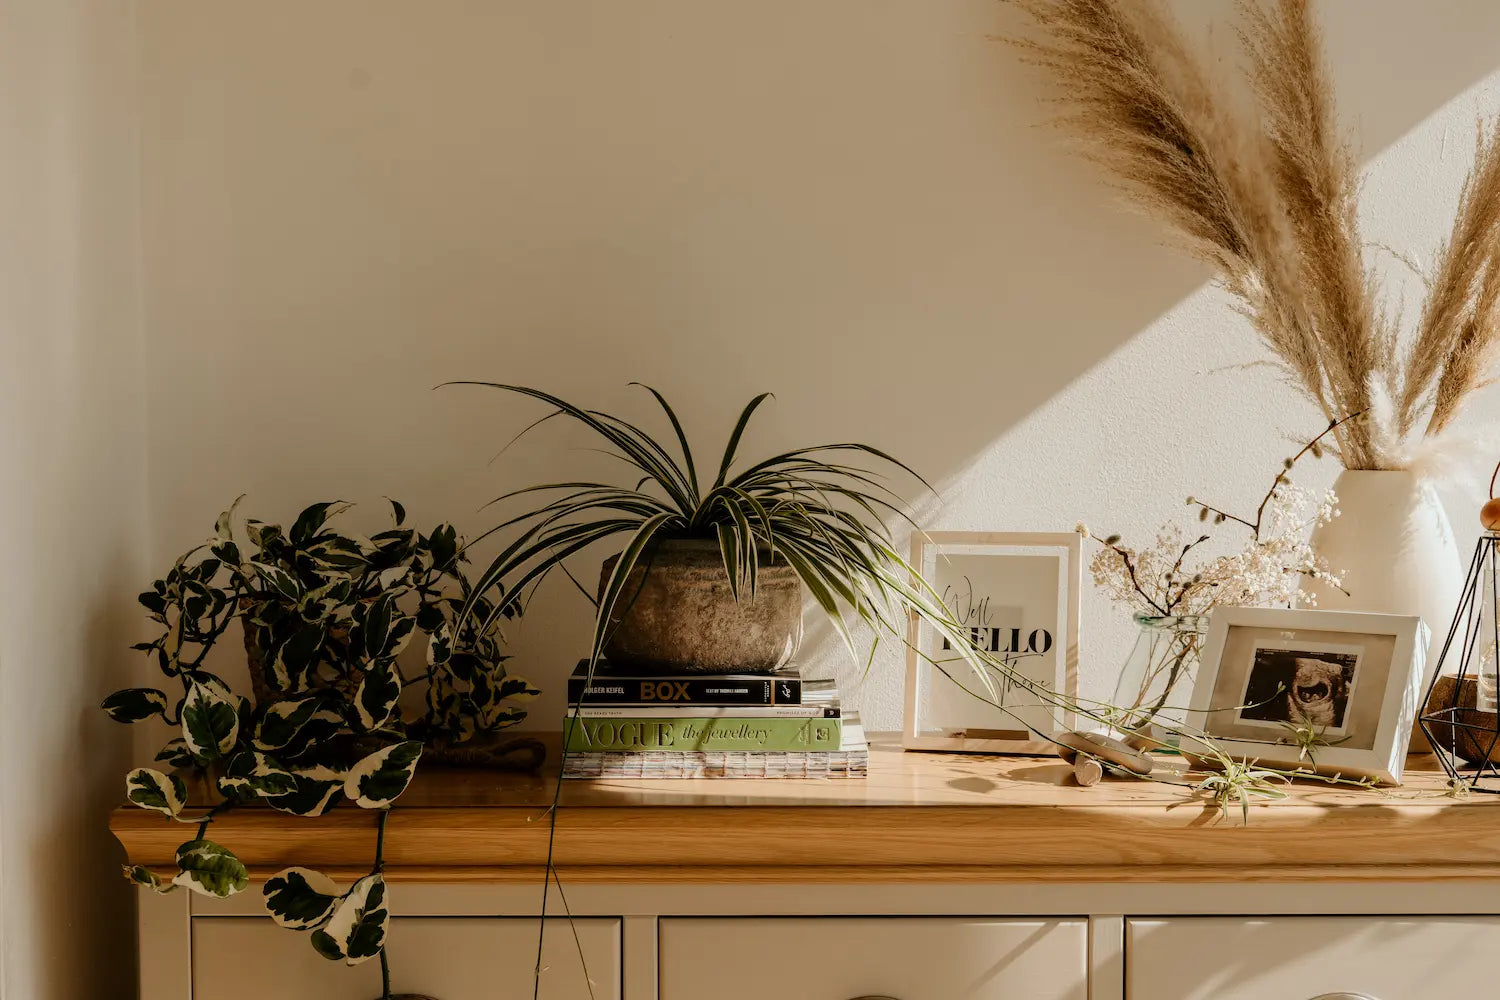 Transform your interior space with pampas grass